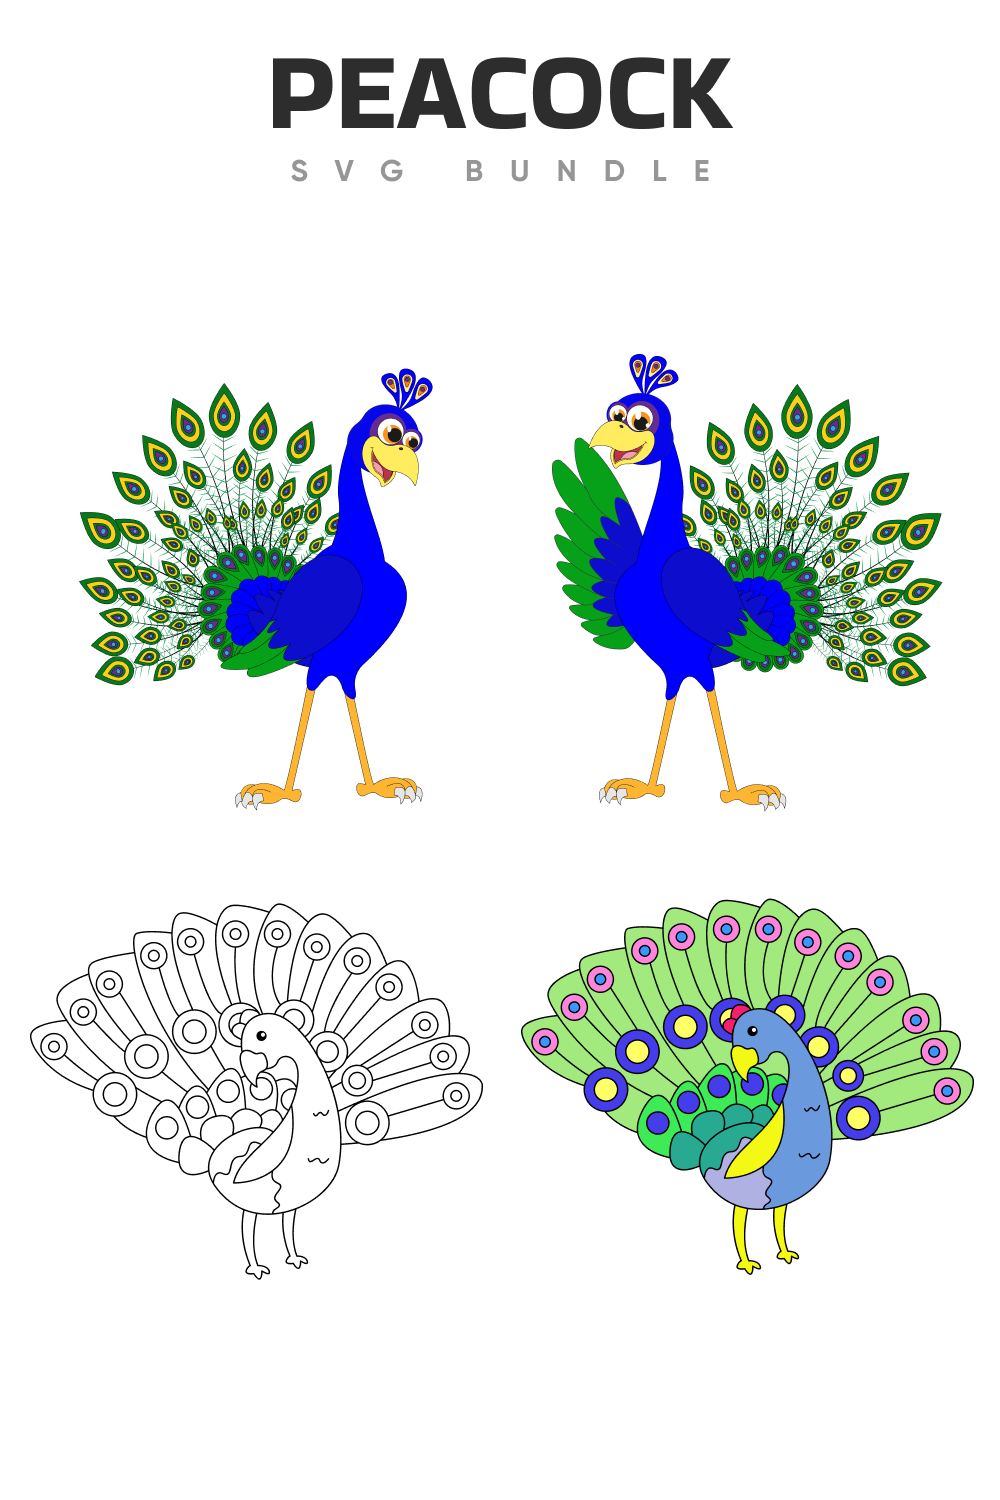 Some options of the colorful peacocks.